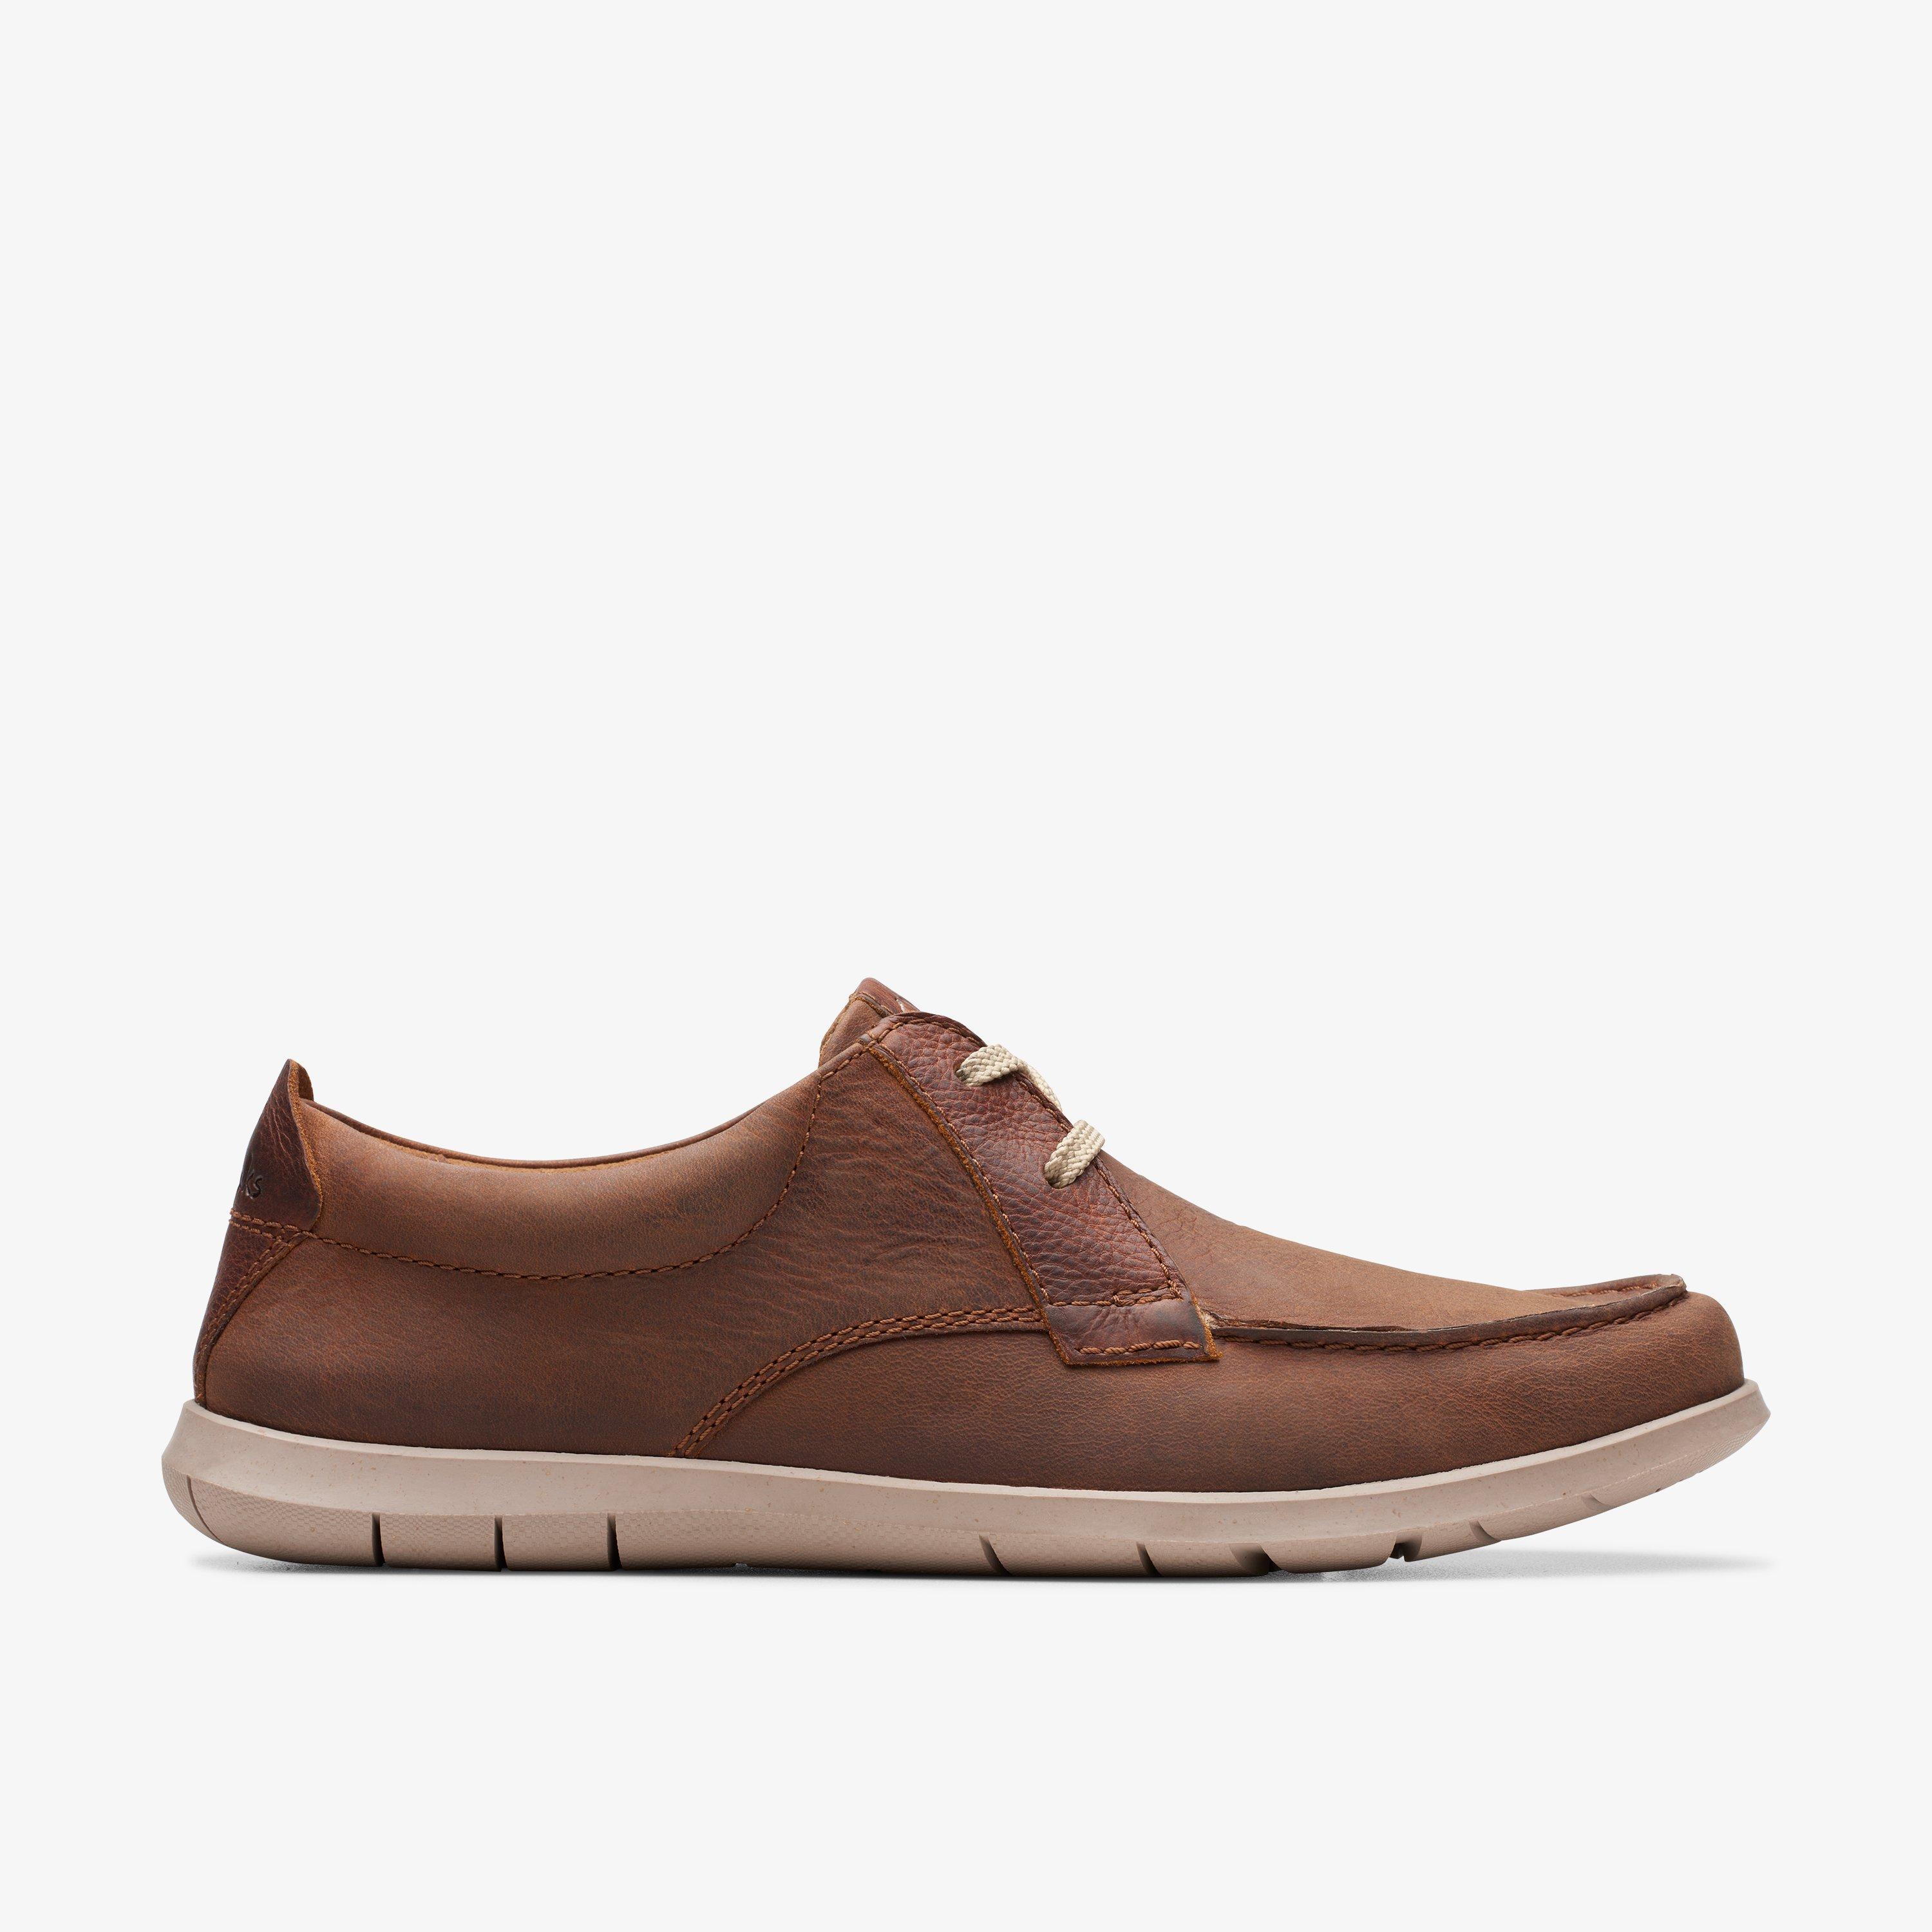 MENS Flexway Lace Dark Tan Leather Boat Shoes | Clarks US